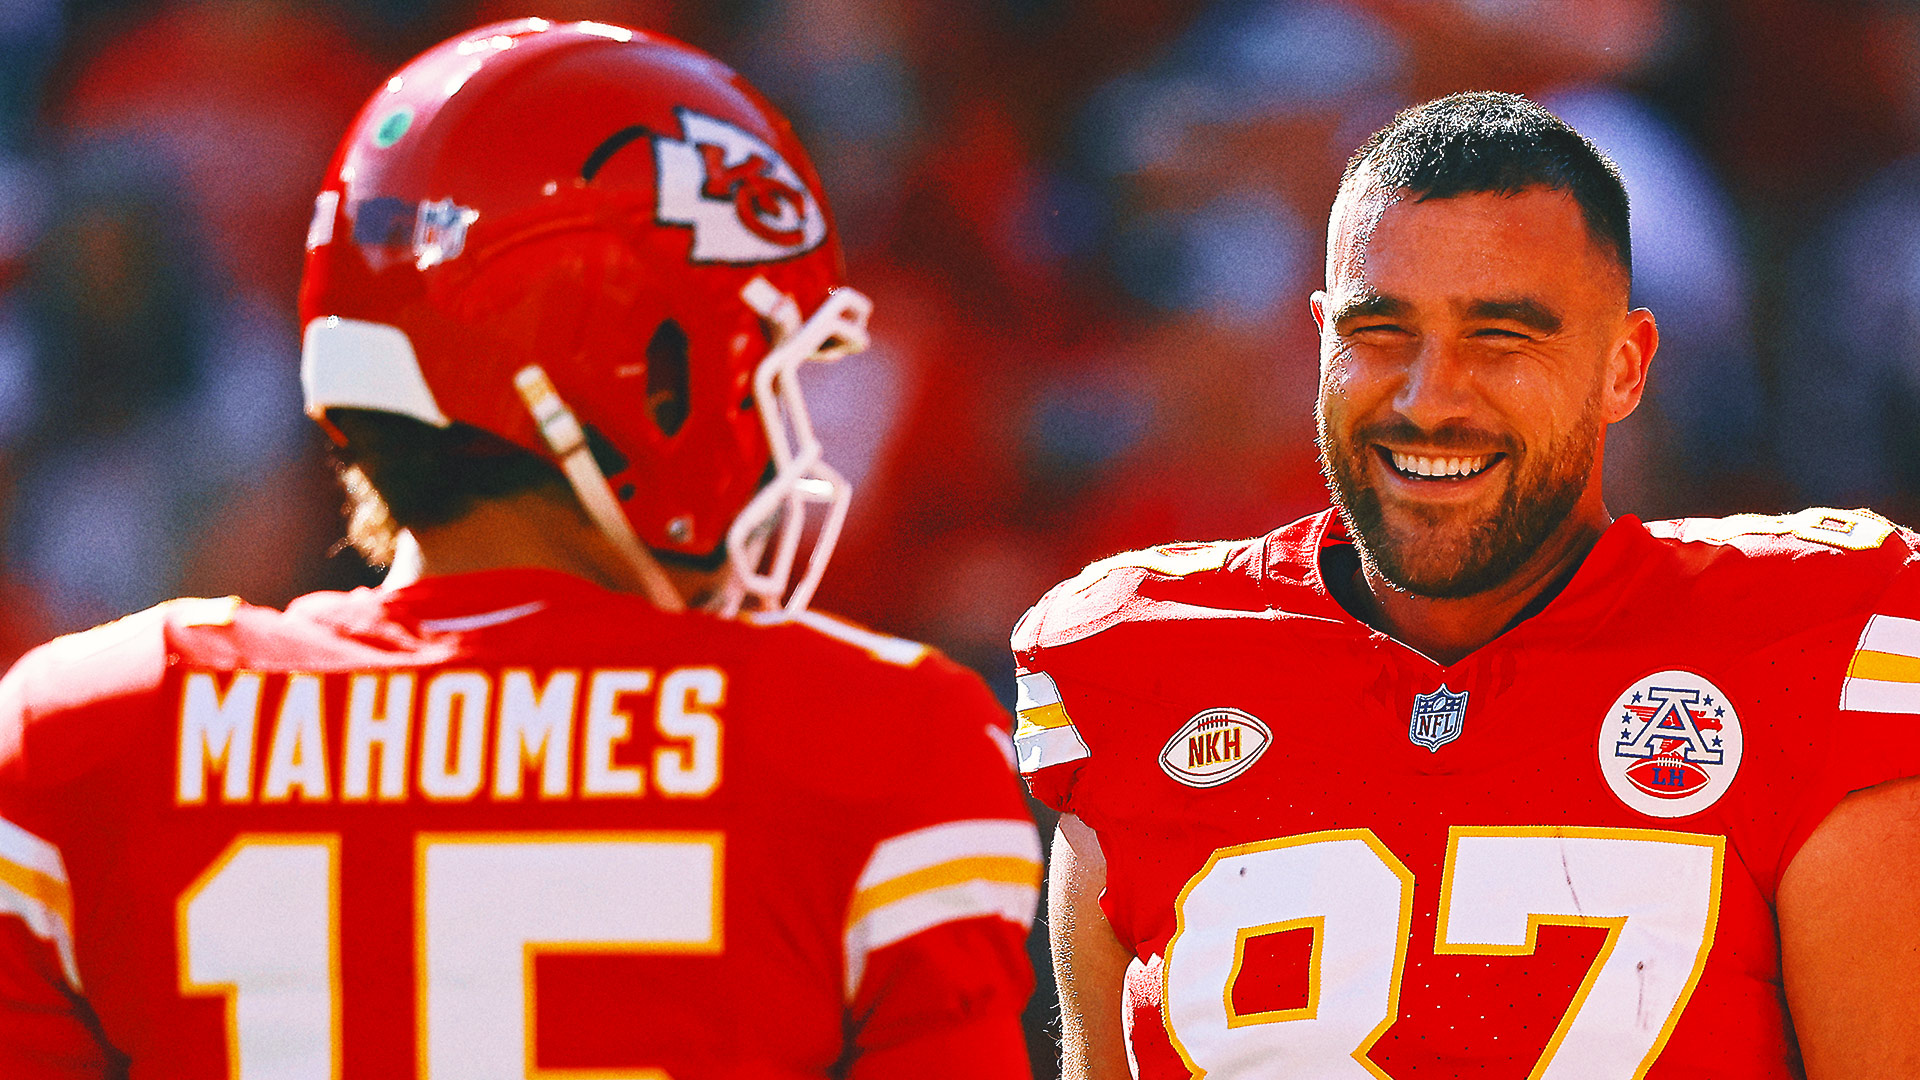 Patrick Mahomes throws 4 TDs, Travis Kelce has big day as Chiefs beat Chargers